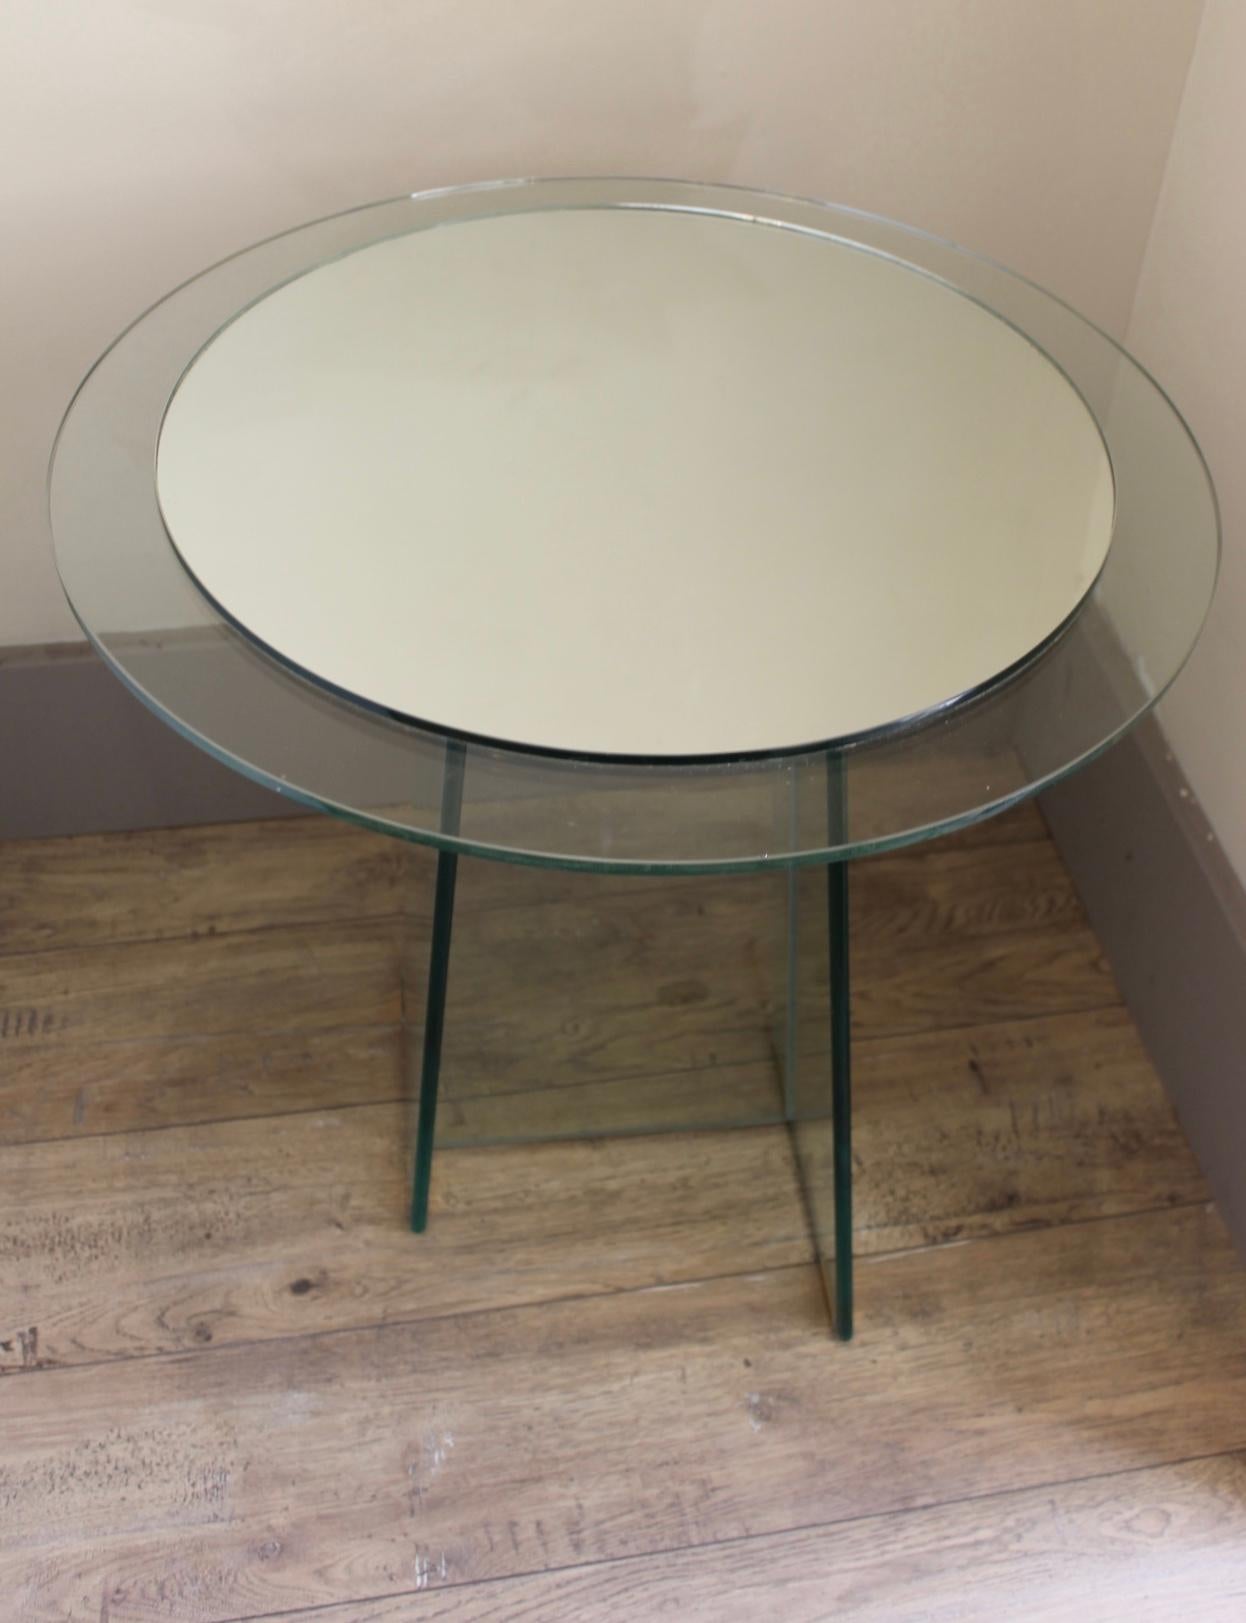 Round glass and mirror pedestal table with asymmetrical glass legs, mirrored top in the style of Fontana Arte from the 70s
Italian work, design
This pedestal table can be placed at the end of a sofa.
Very original in its design. That makes it